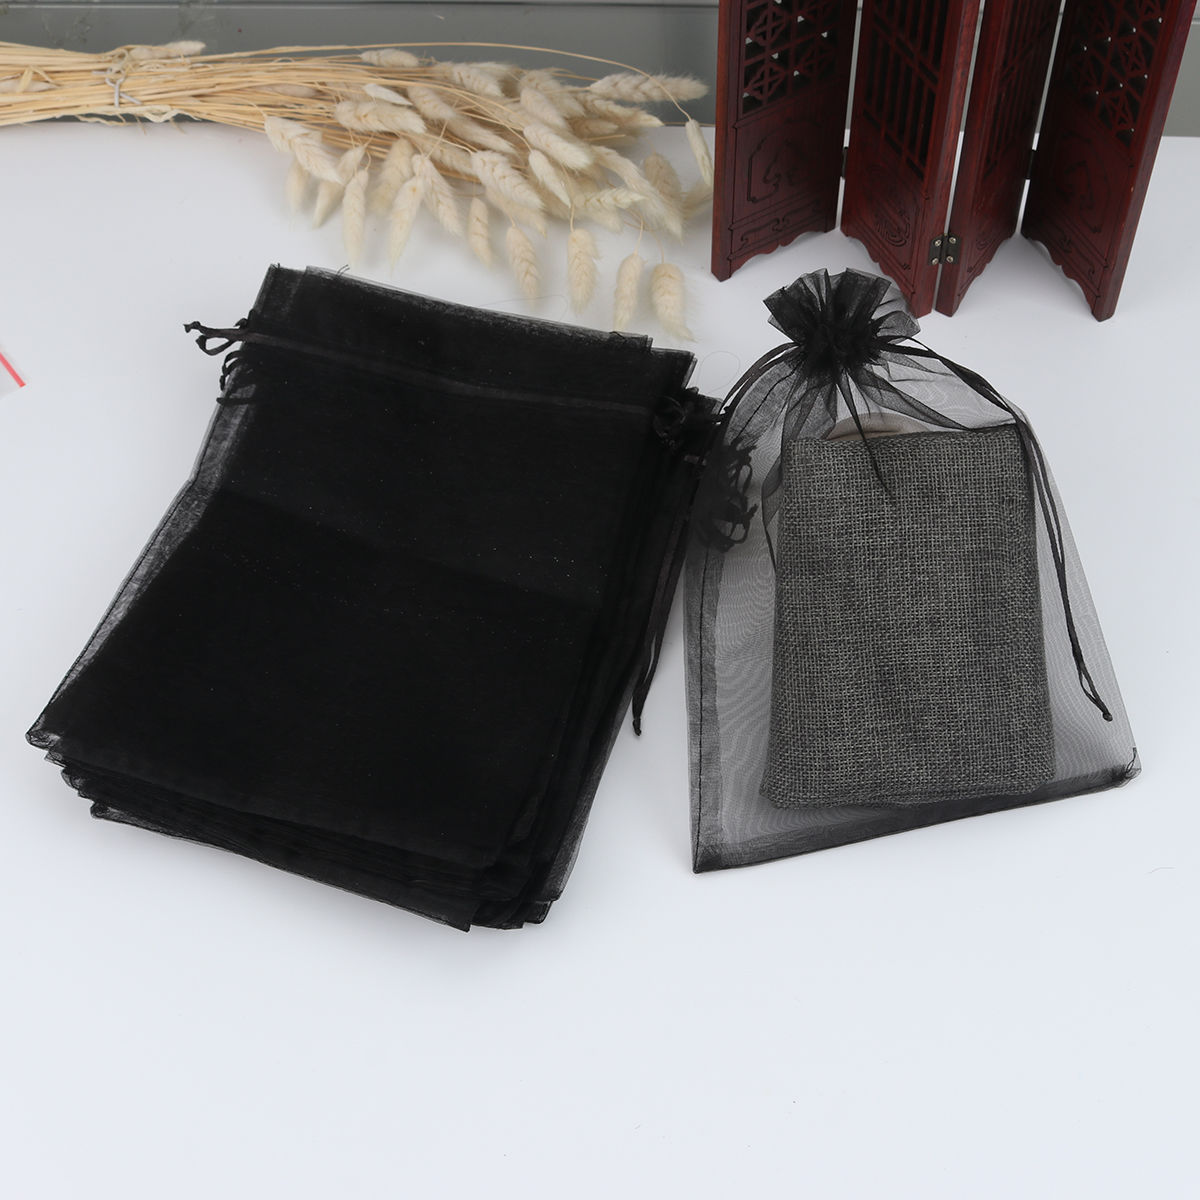 Picture of Wedding Gift Organza Jewelry Bags Drawstring Rectangle Black (Usable Space: 19x16.5cm) 23cm x 17cm, 20 PCs